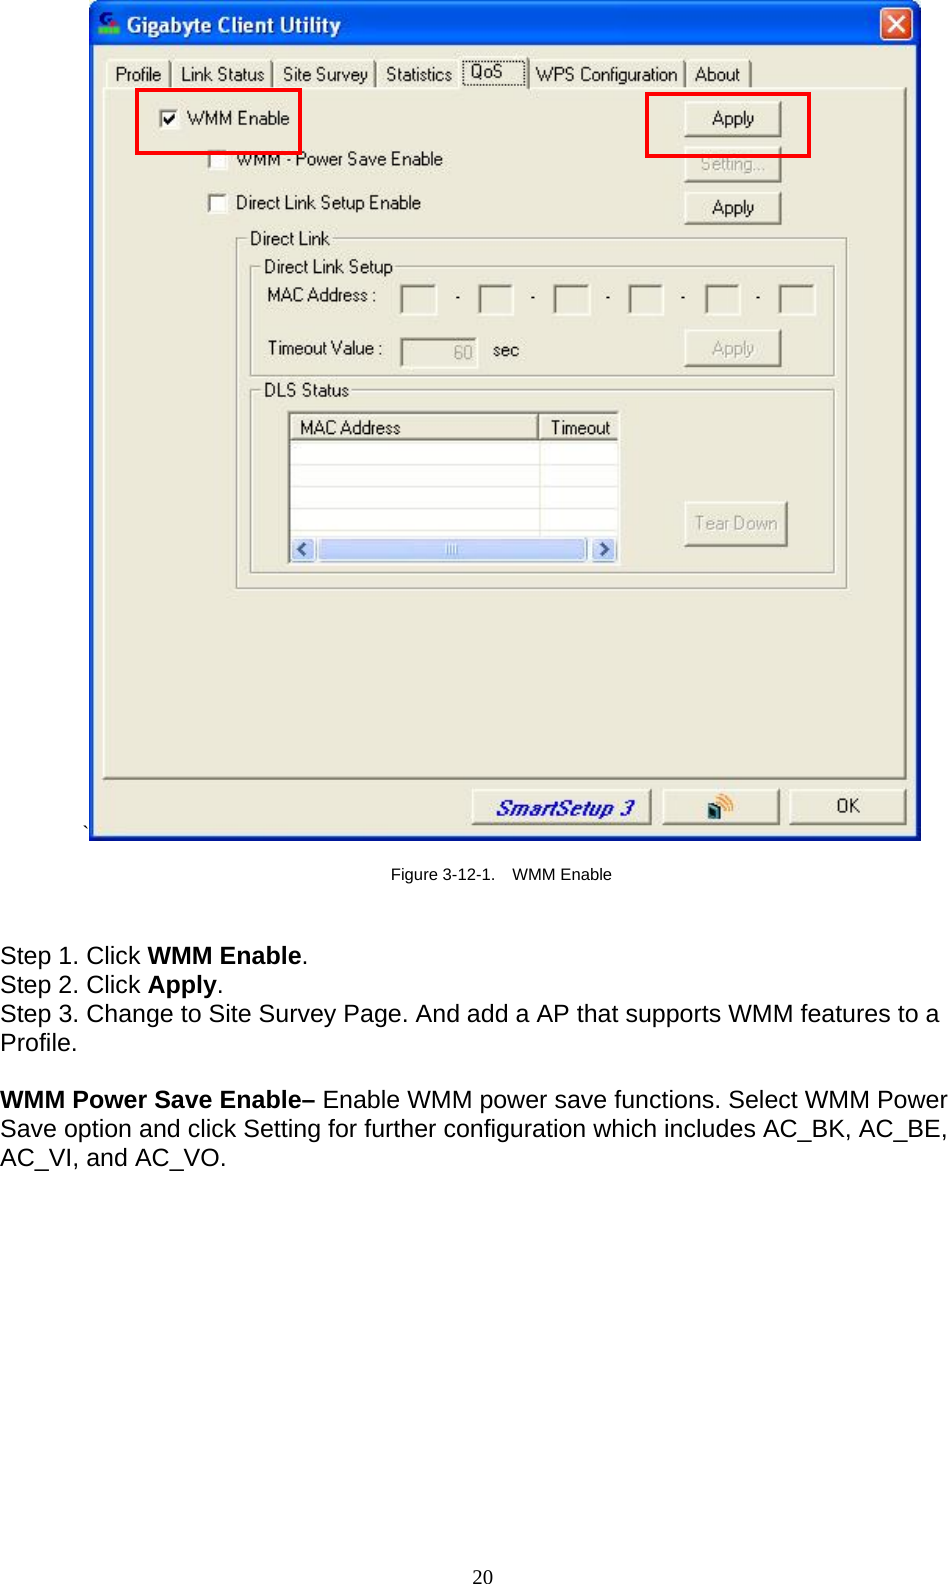 `  Figure 3-12-1.    WMM Enable   Step 1. Click WMM Enable.  Step 2. Click Apply. Step 3. Change to Site Survey Page. And add a AP that supports WMM features to a Profile.  WMM Power Save Enable– Enable WMM power save functions. Select WMM Power Save option and click Setting for further configuration which includes AC_BK, AC_BE, AC_VI, and AC_VO.  20   